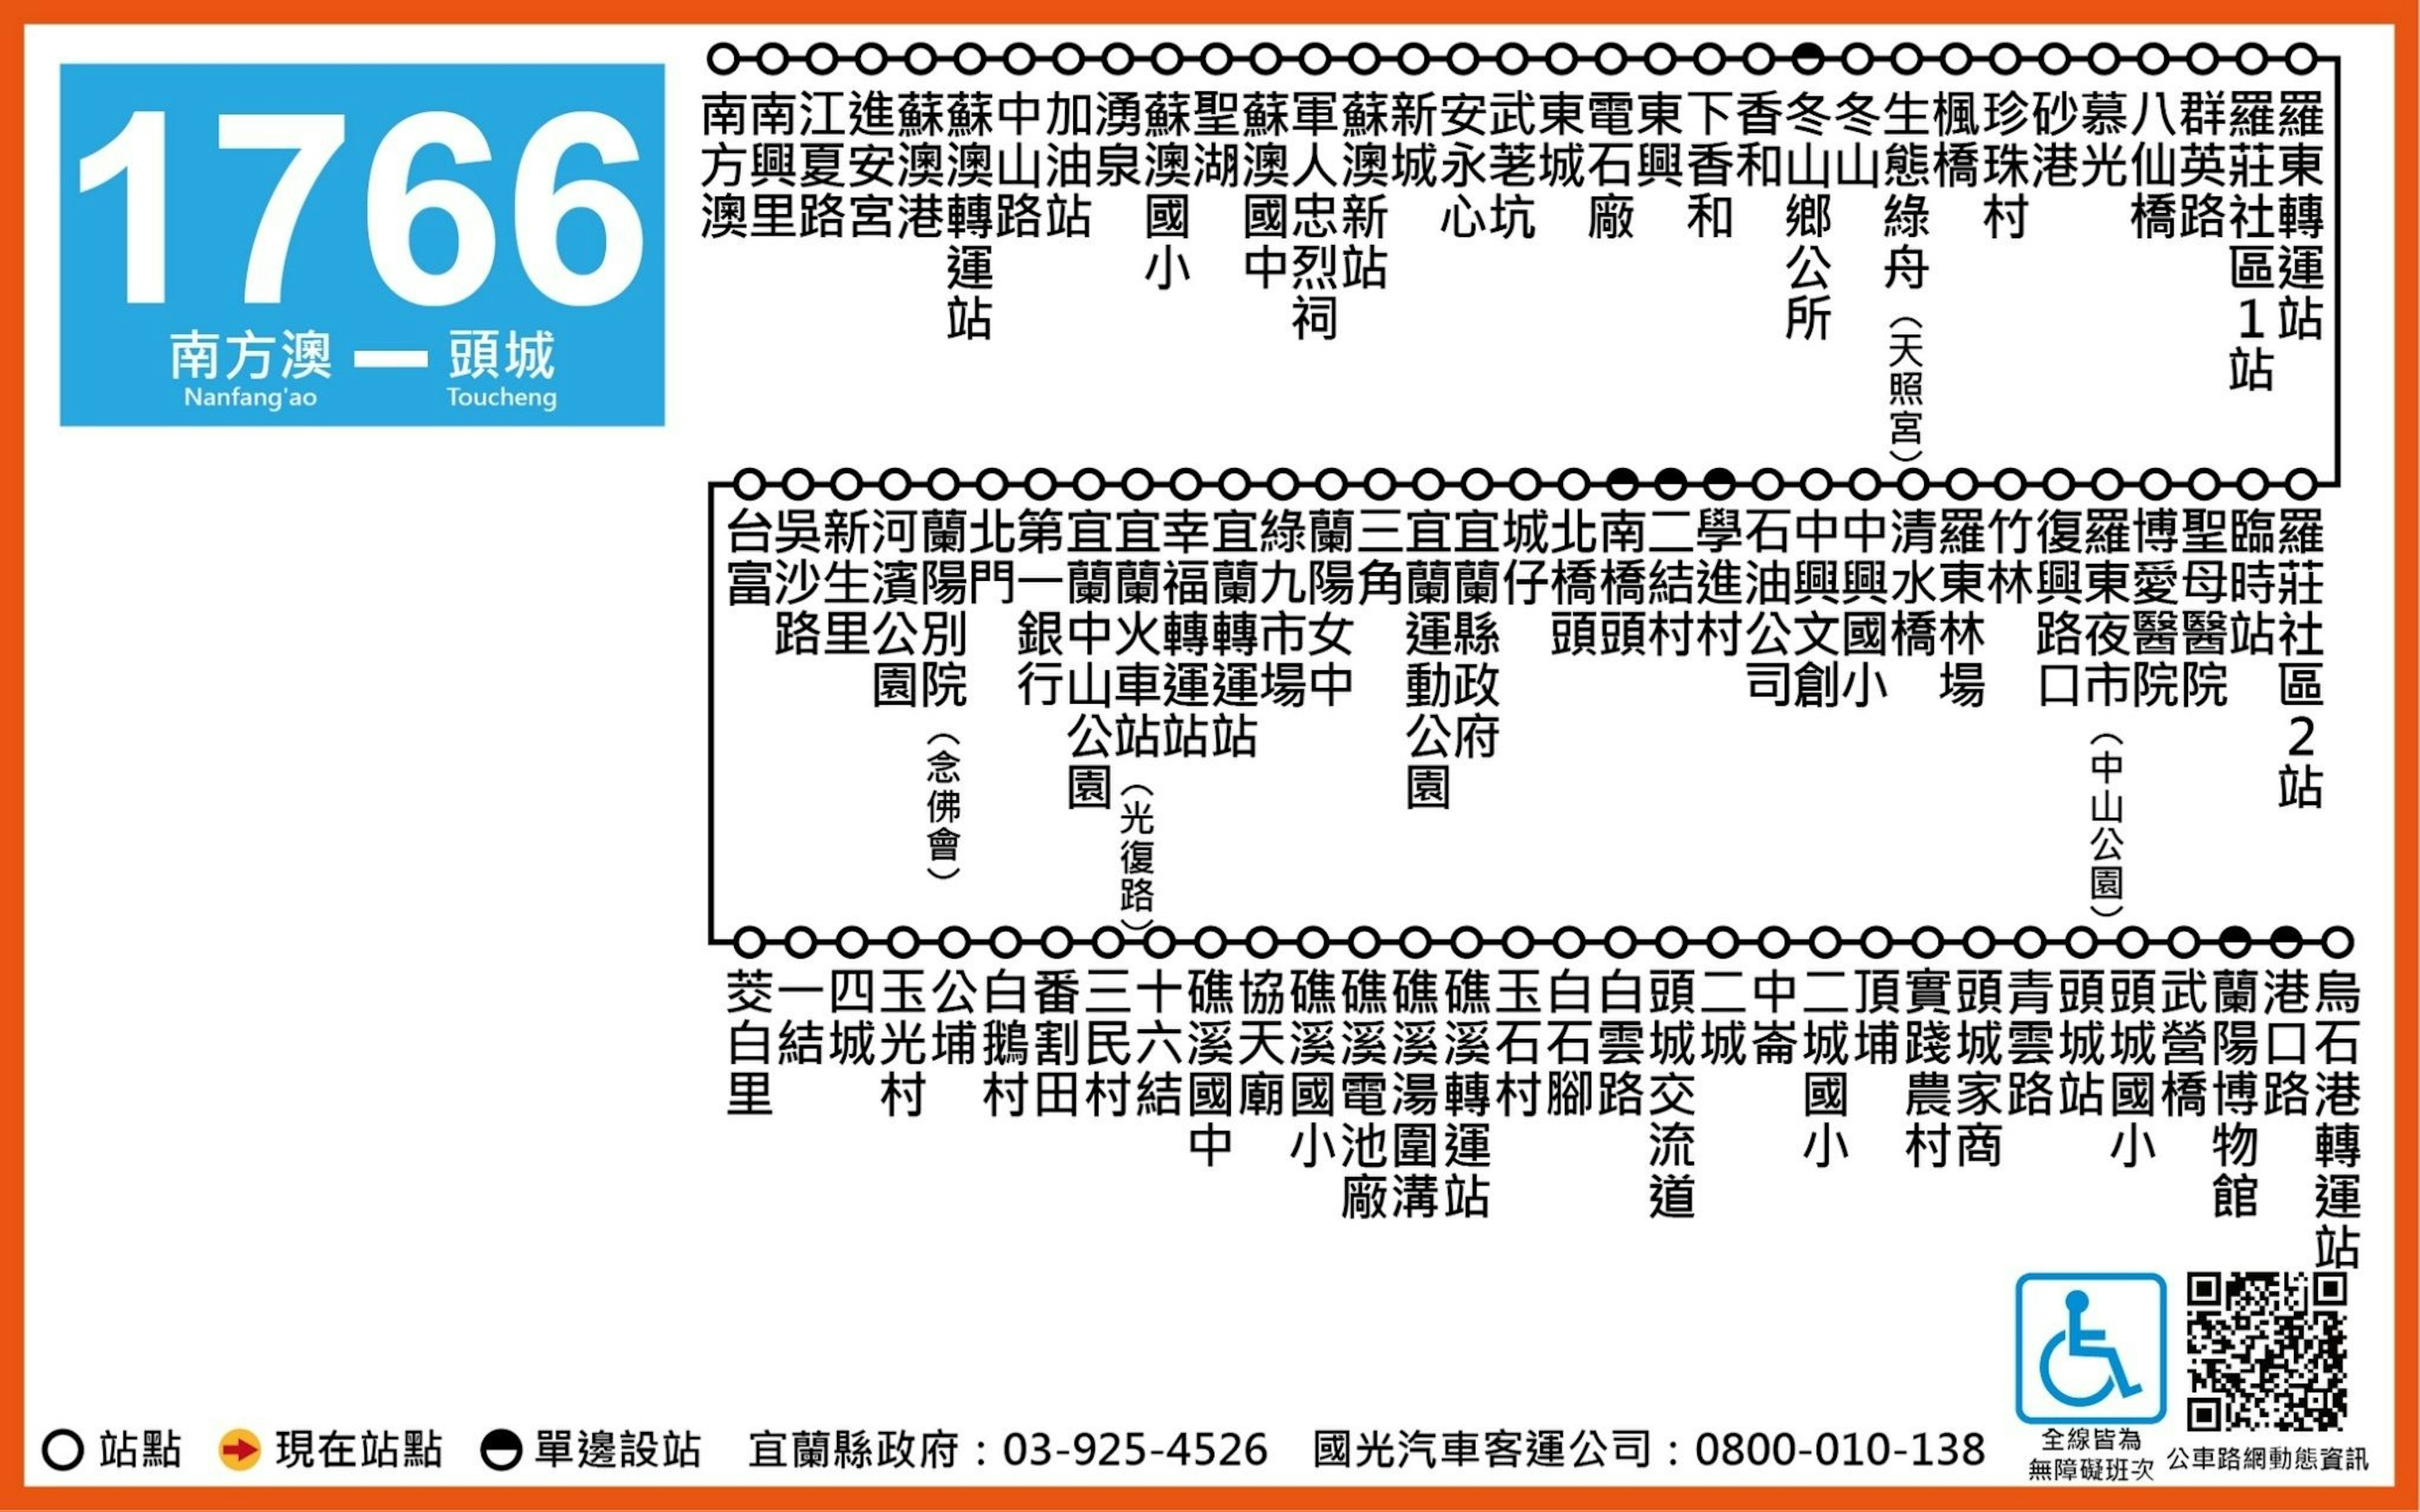 1766Route Map-宜蘭 Bus